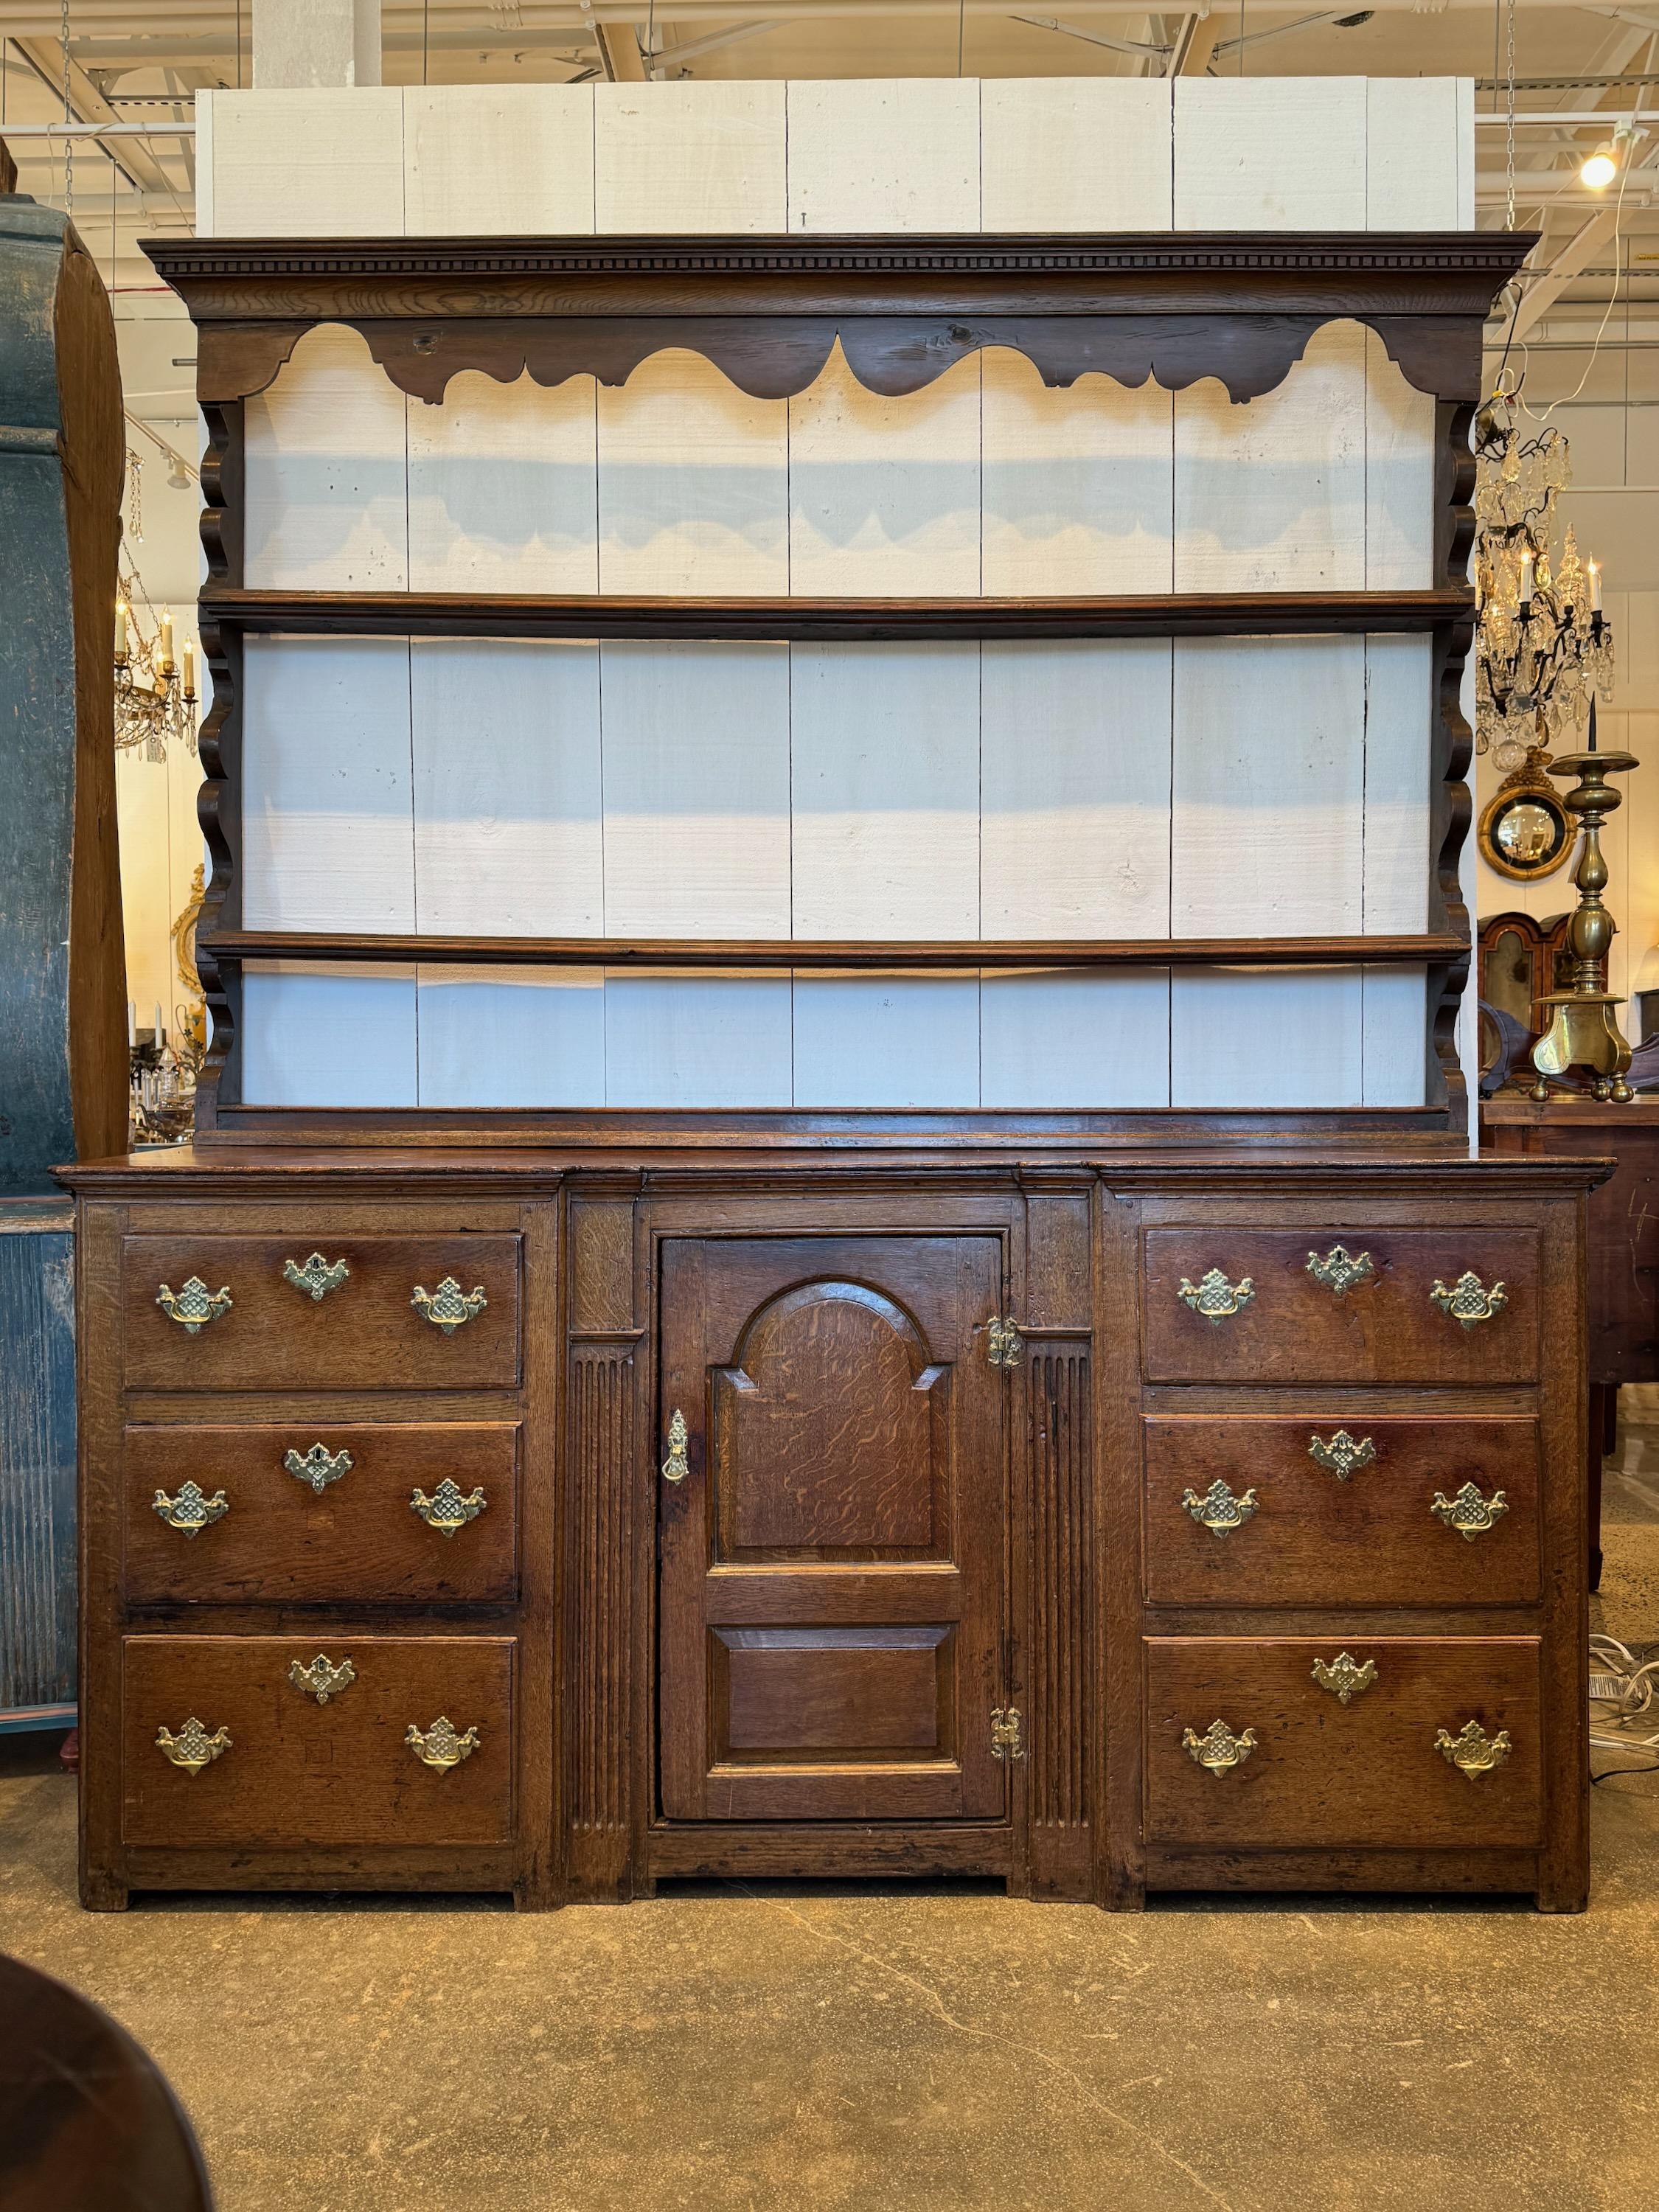 A handsome Welsh dresser with plate rack. Lots of storage room.